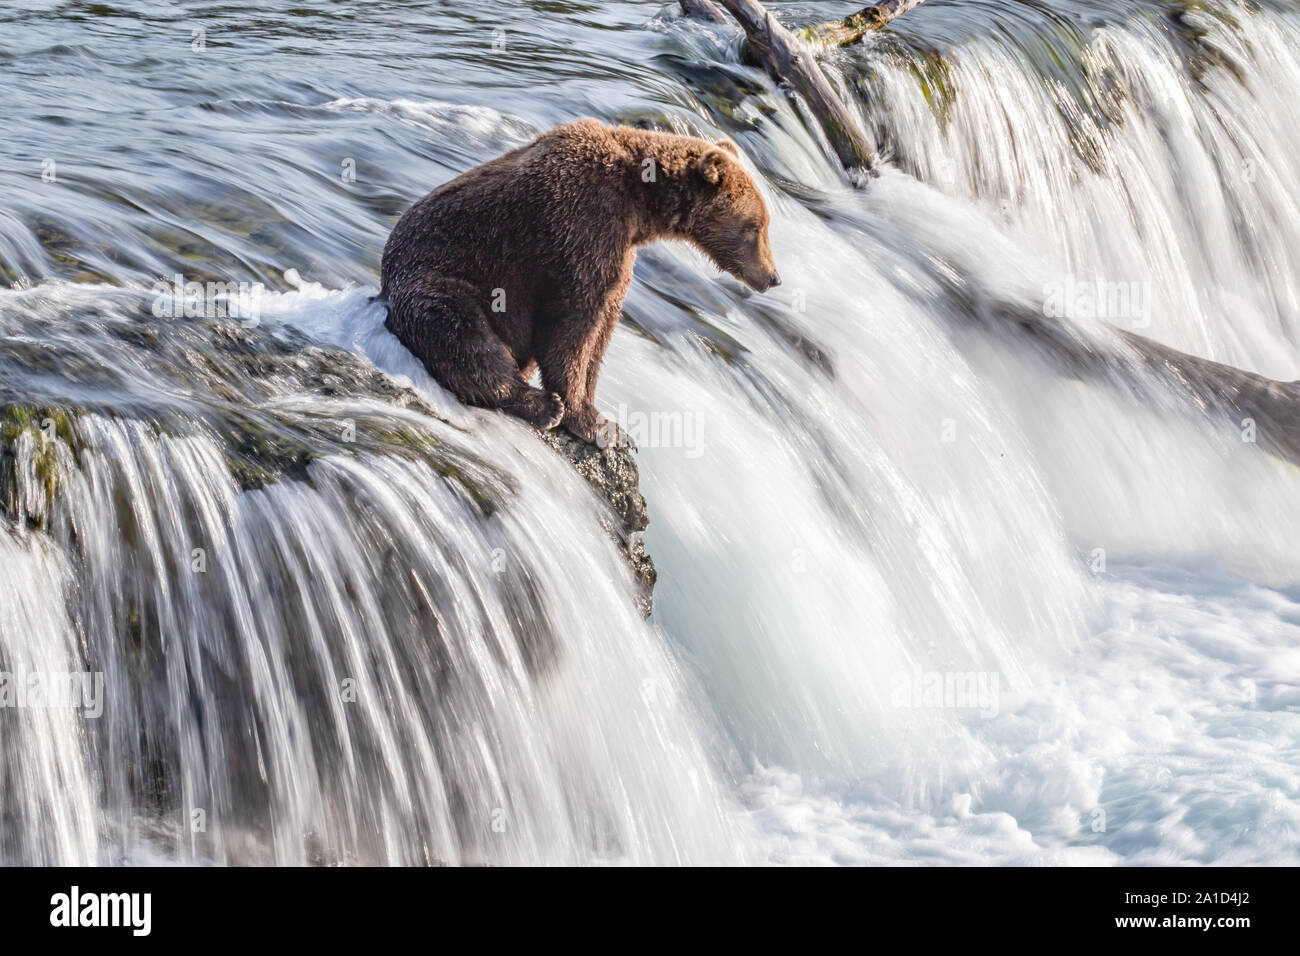 Cute young grizzly bear sitting on Brooks Falls in Katmai, Alaska Stock Photo